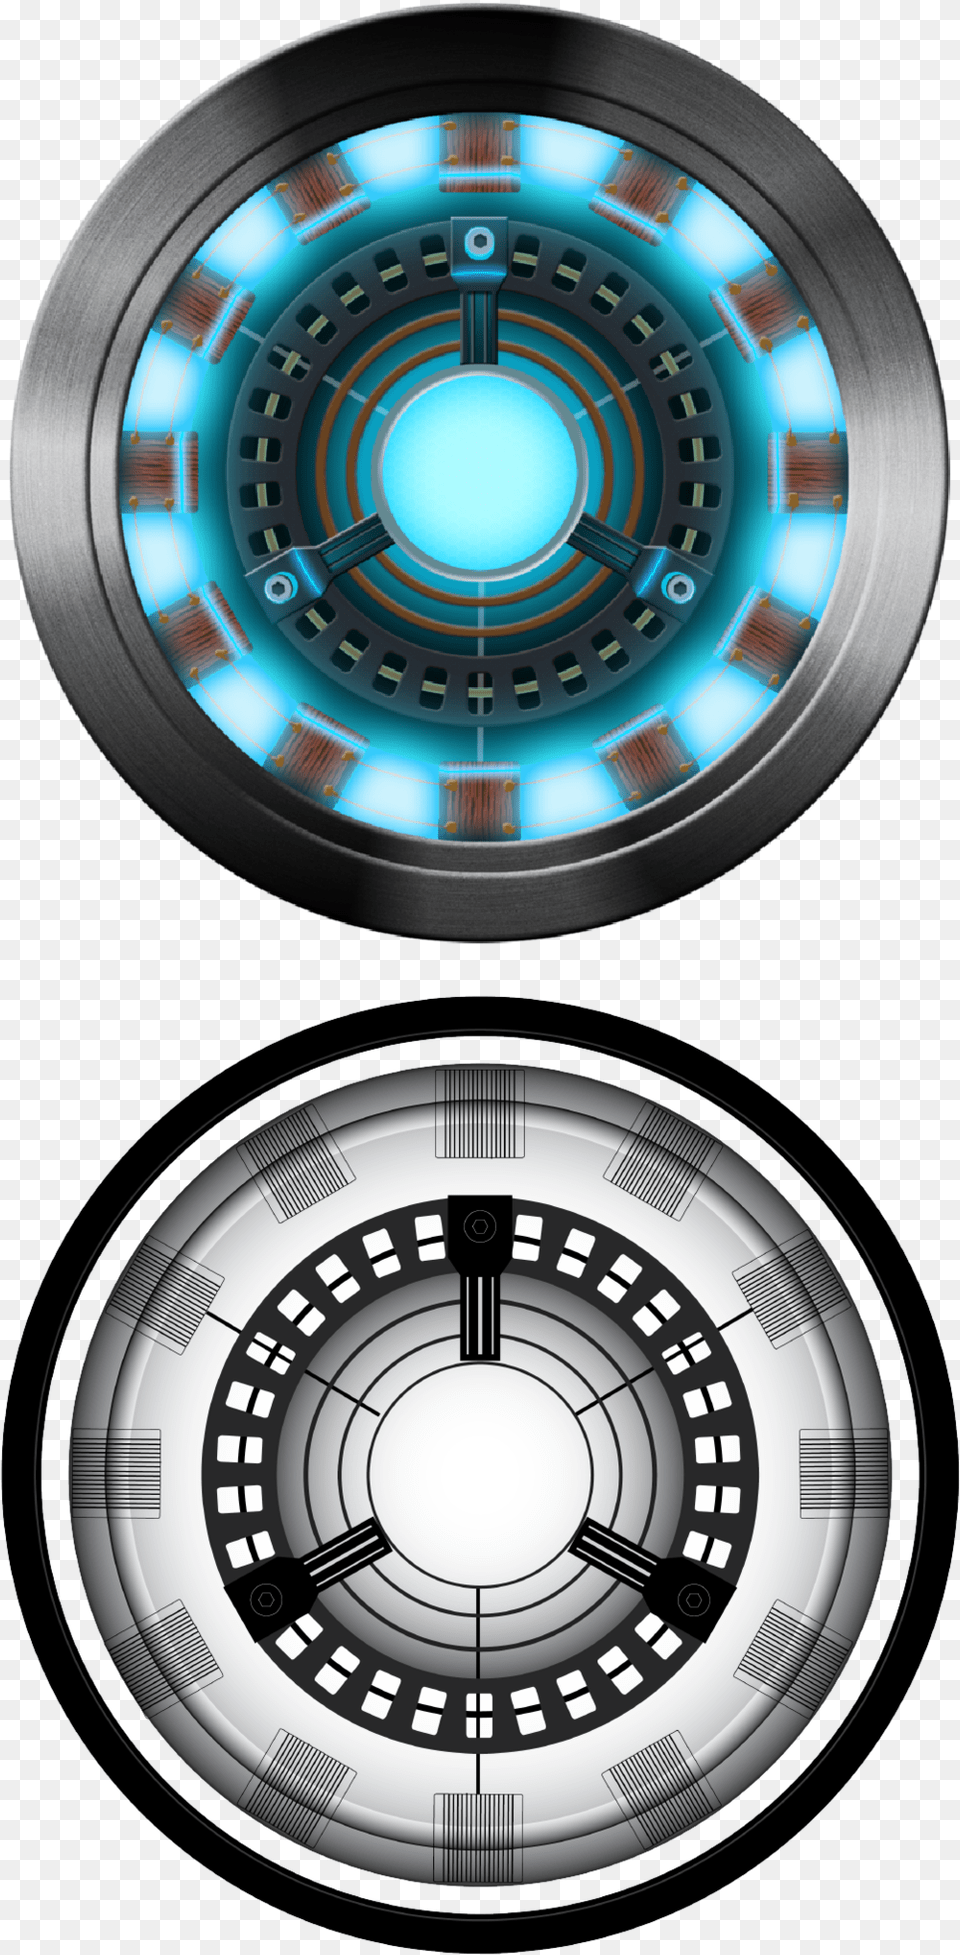 Iron Man Arc Reactor Image Proof That Tony Stark Has A Heart Outline, Lighting Png